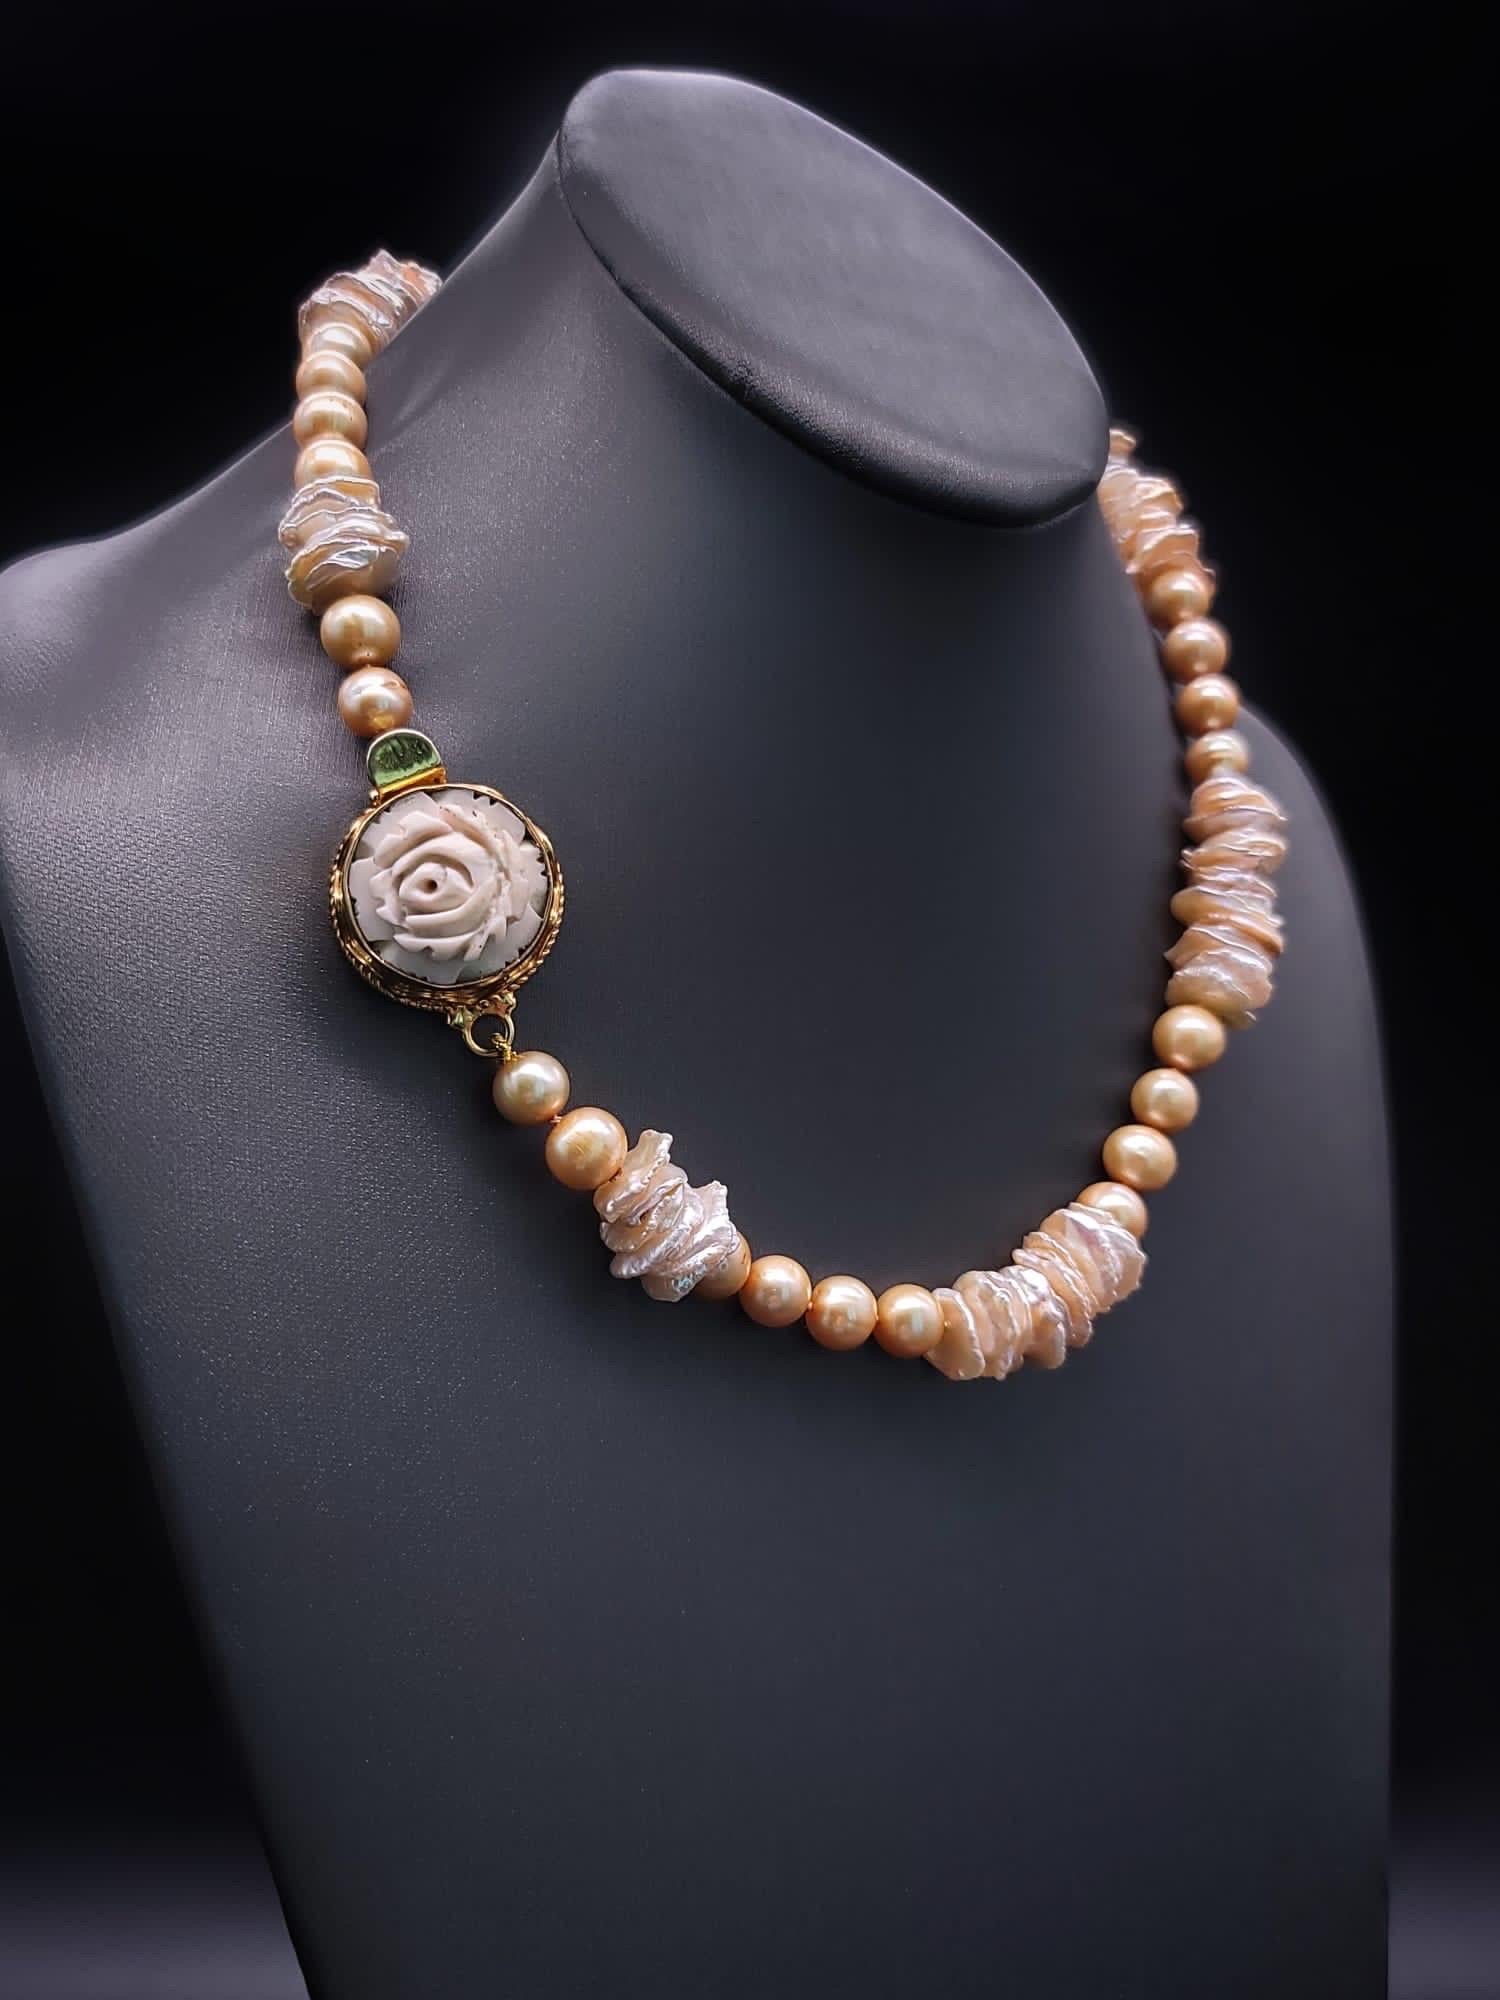 A.Jeschel Exquisite One-of-a-Kind Gold Pearl Necklace. In New Condition For Sale In Miami, FL